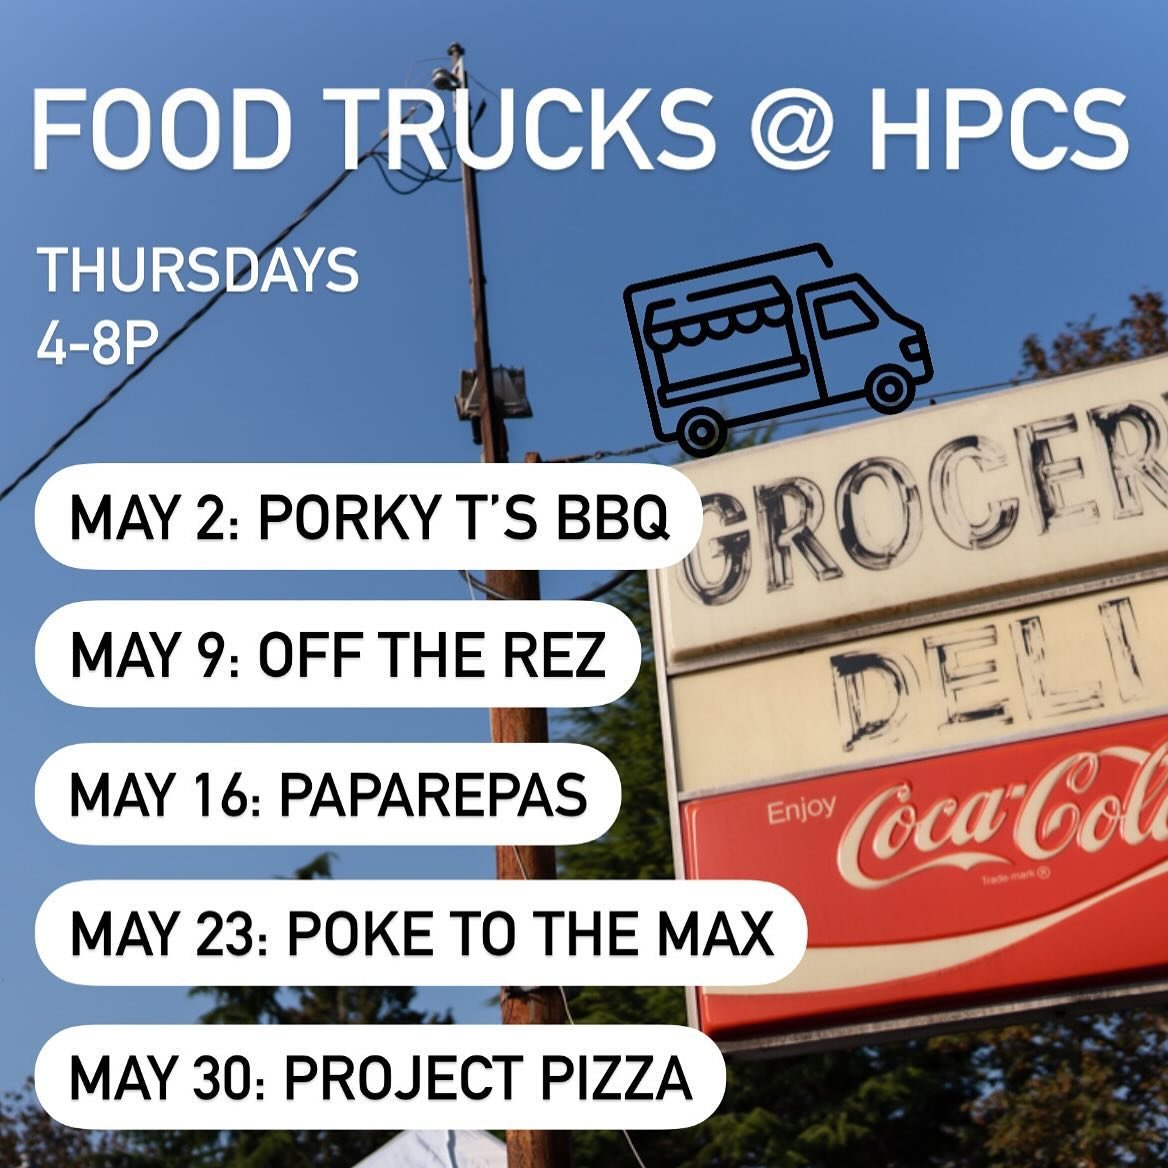 May&rsquo;s food truck line up is here! And this month we get a bonus 5th Thursday 🙌 Food trucks pop up at the Corner Store every Thursday from 4-8pm 

#foodtruck #supportlocalbusinesses #thursdaydinnerideas #highlandpark #cornerstore #westseattle